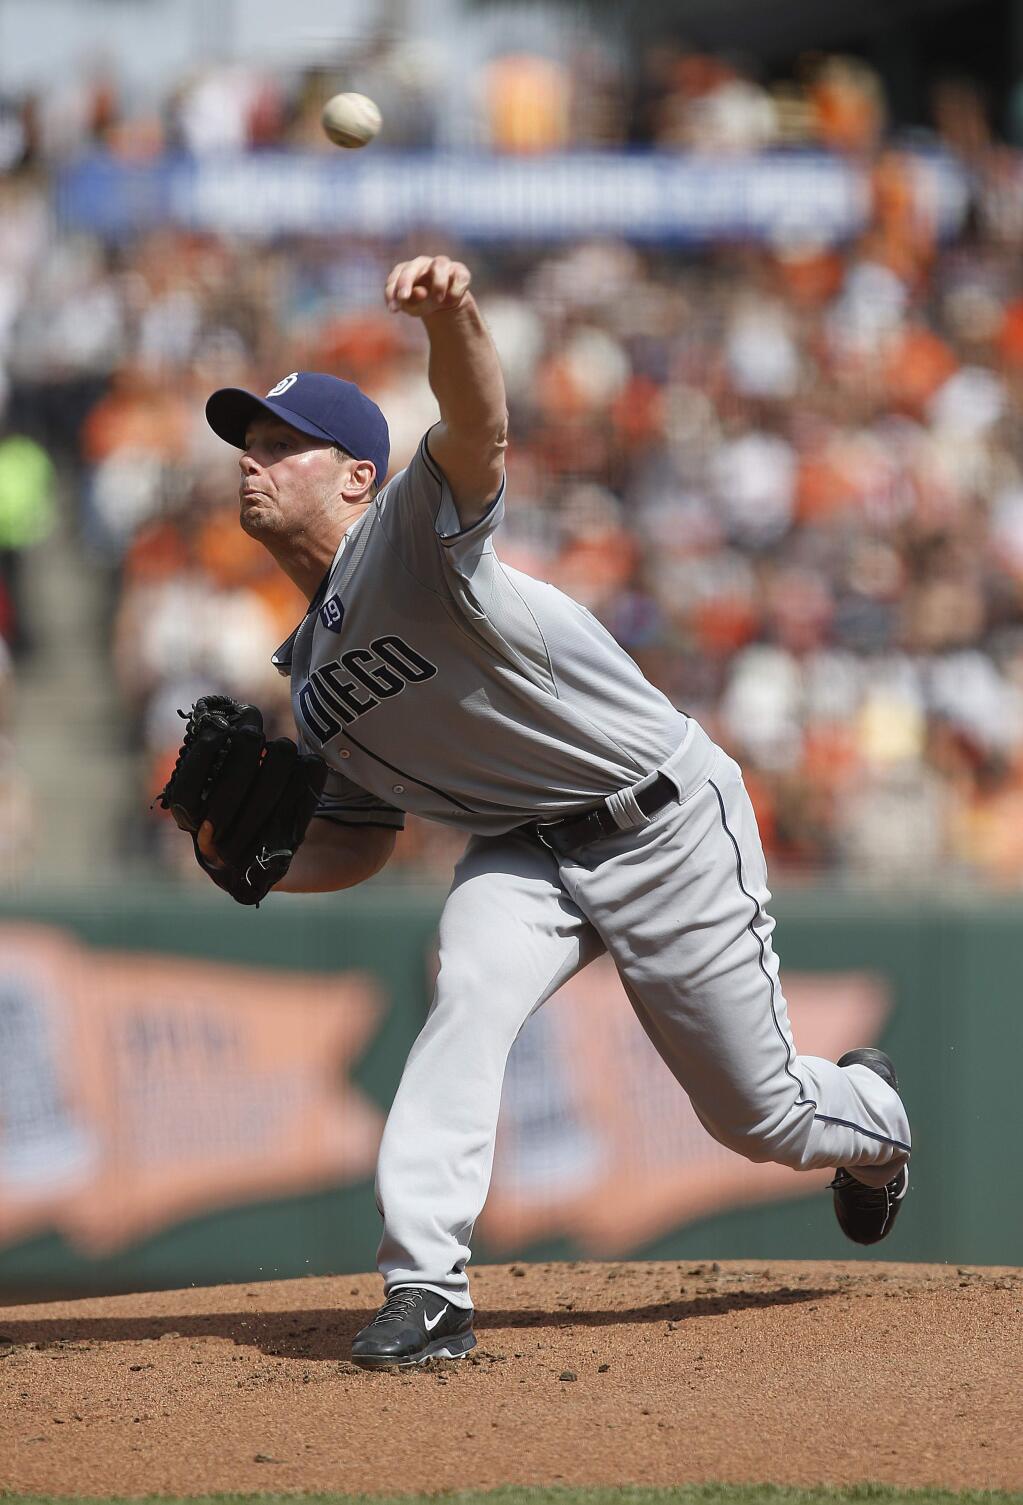 San Diego Padres starting pitcher Robbie Erlin throws against the San Francisco Giants during the first inning of a baseball game in San Francisco, Sunday, Sept. 28, 2014. (AP Photo/Tony Avelar)